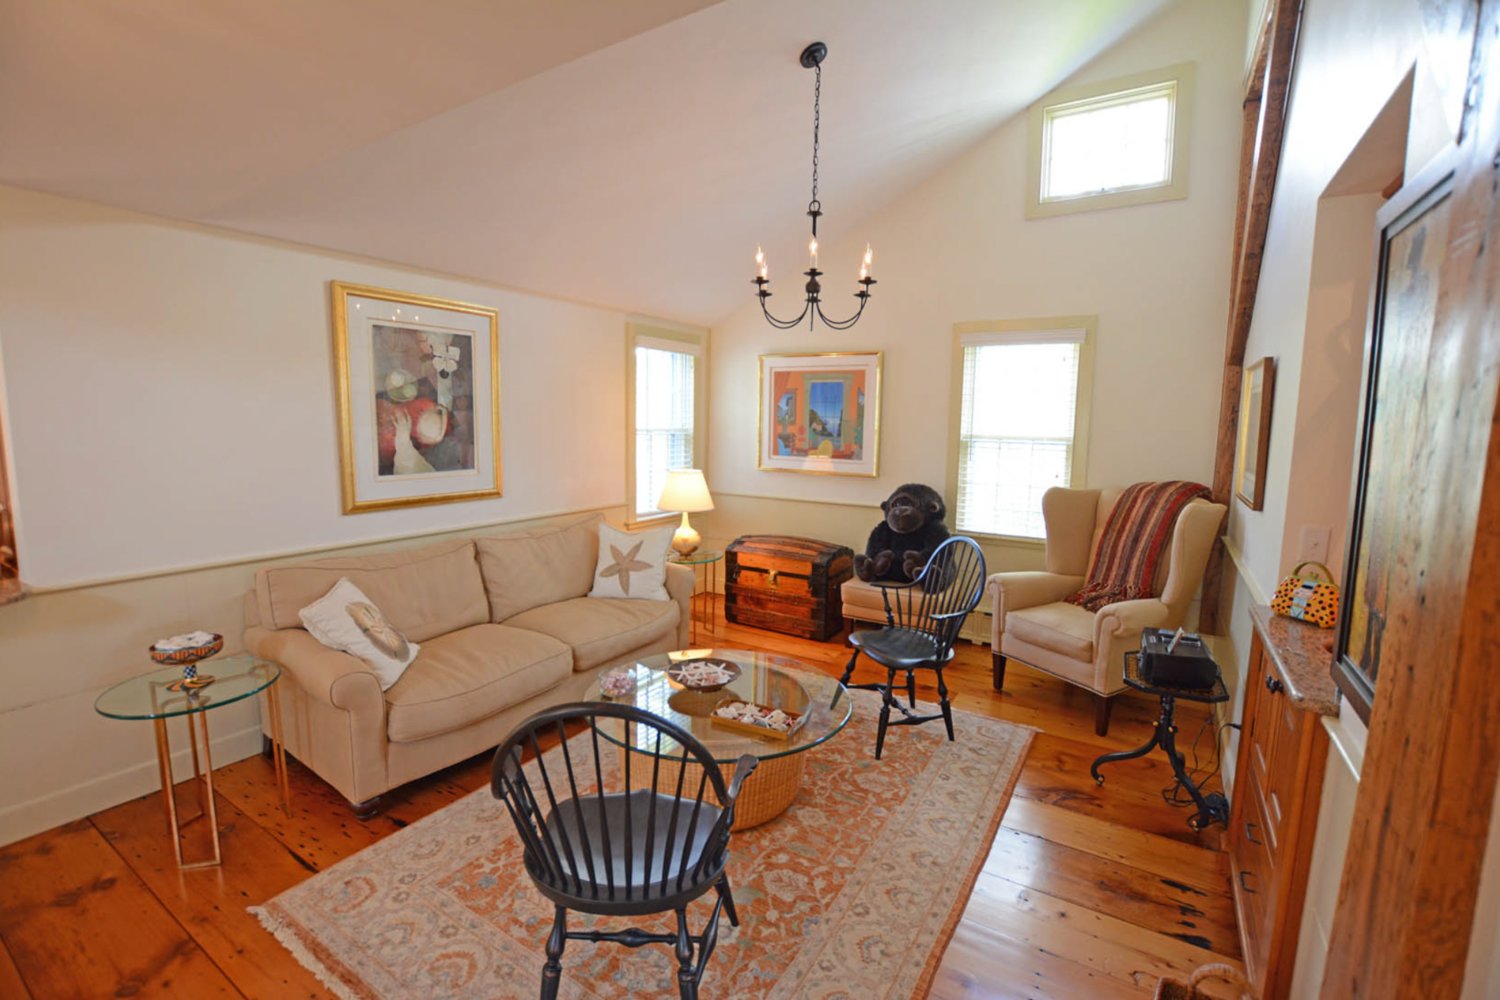 The sitting room has wide pine floors, beadboard wainscoting and a vaulted ceiling.